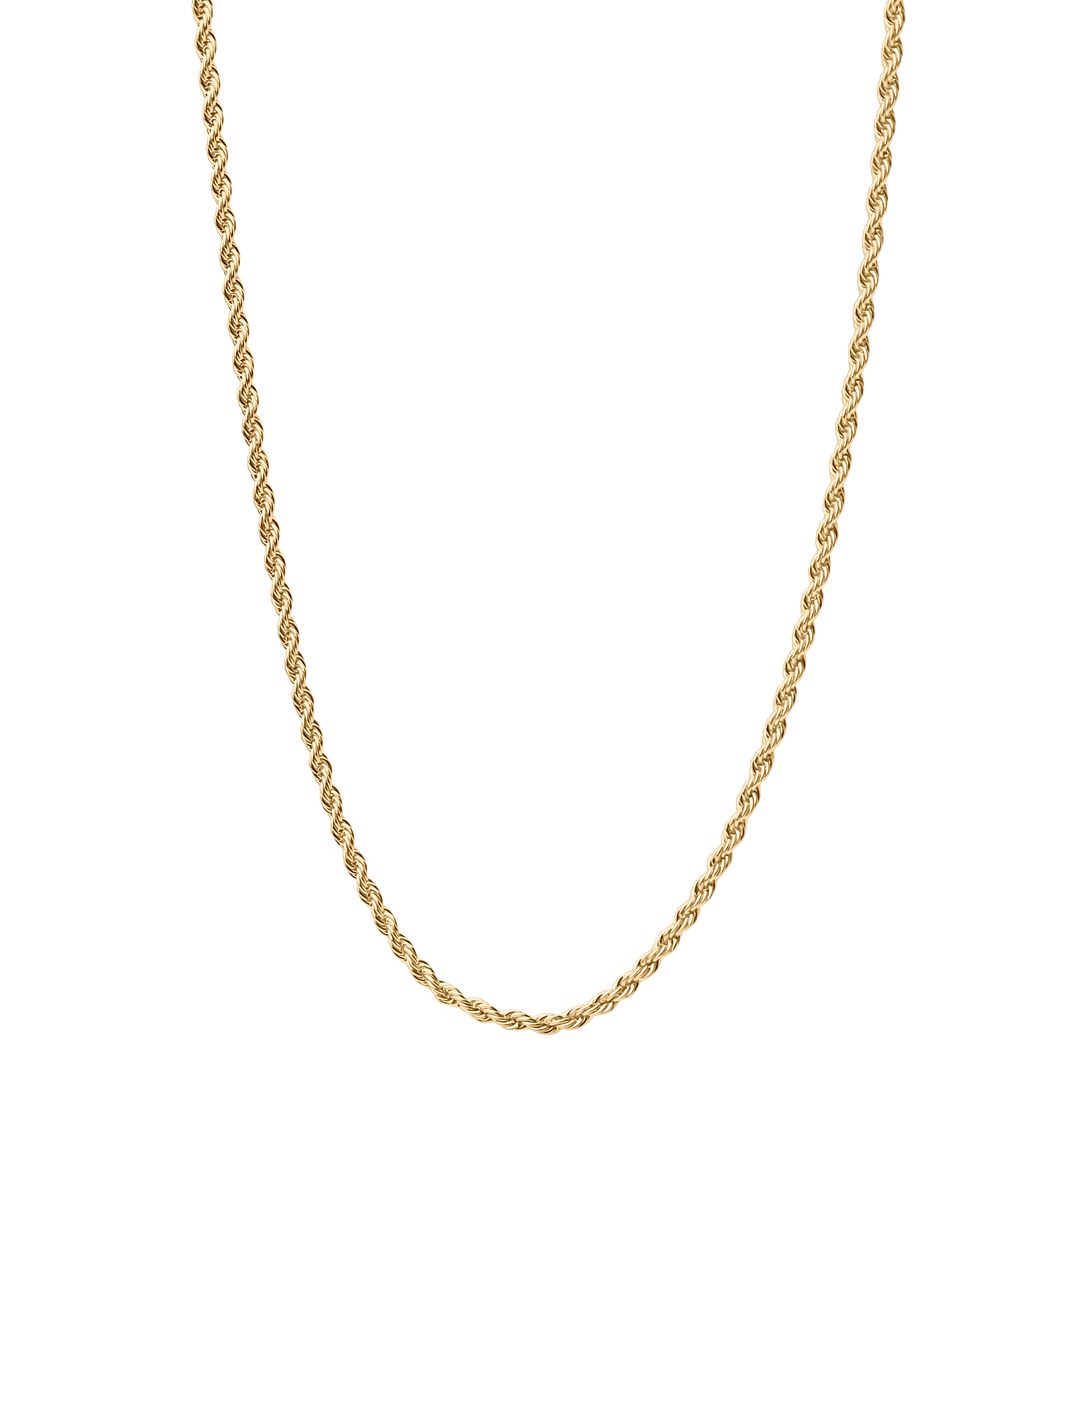 Stainless Steel or Gold Filled Double Layer Chain Bra Body Chain in Gold or  Silver, Handmade, Non-tarnish -  Singapore